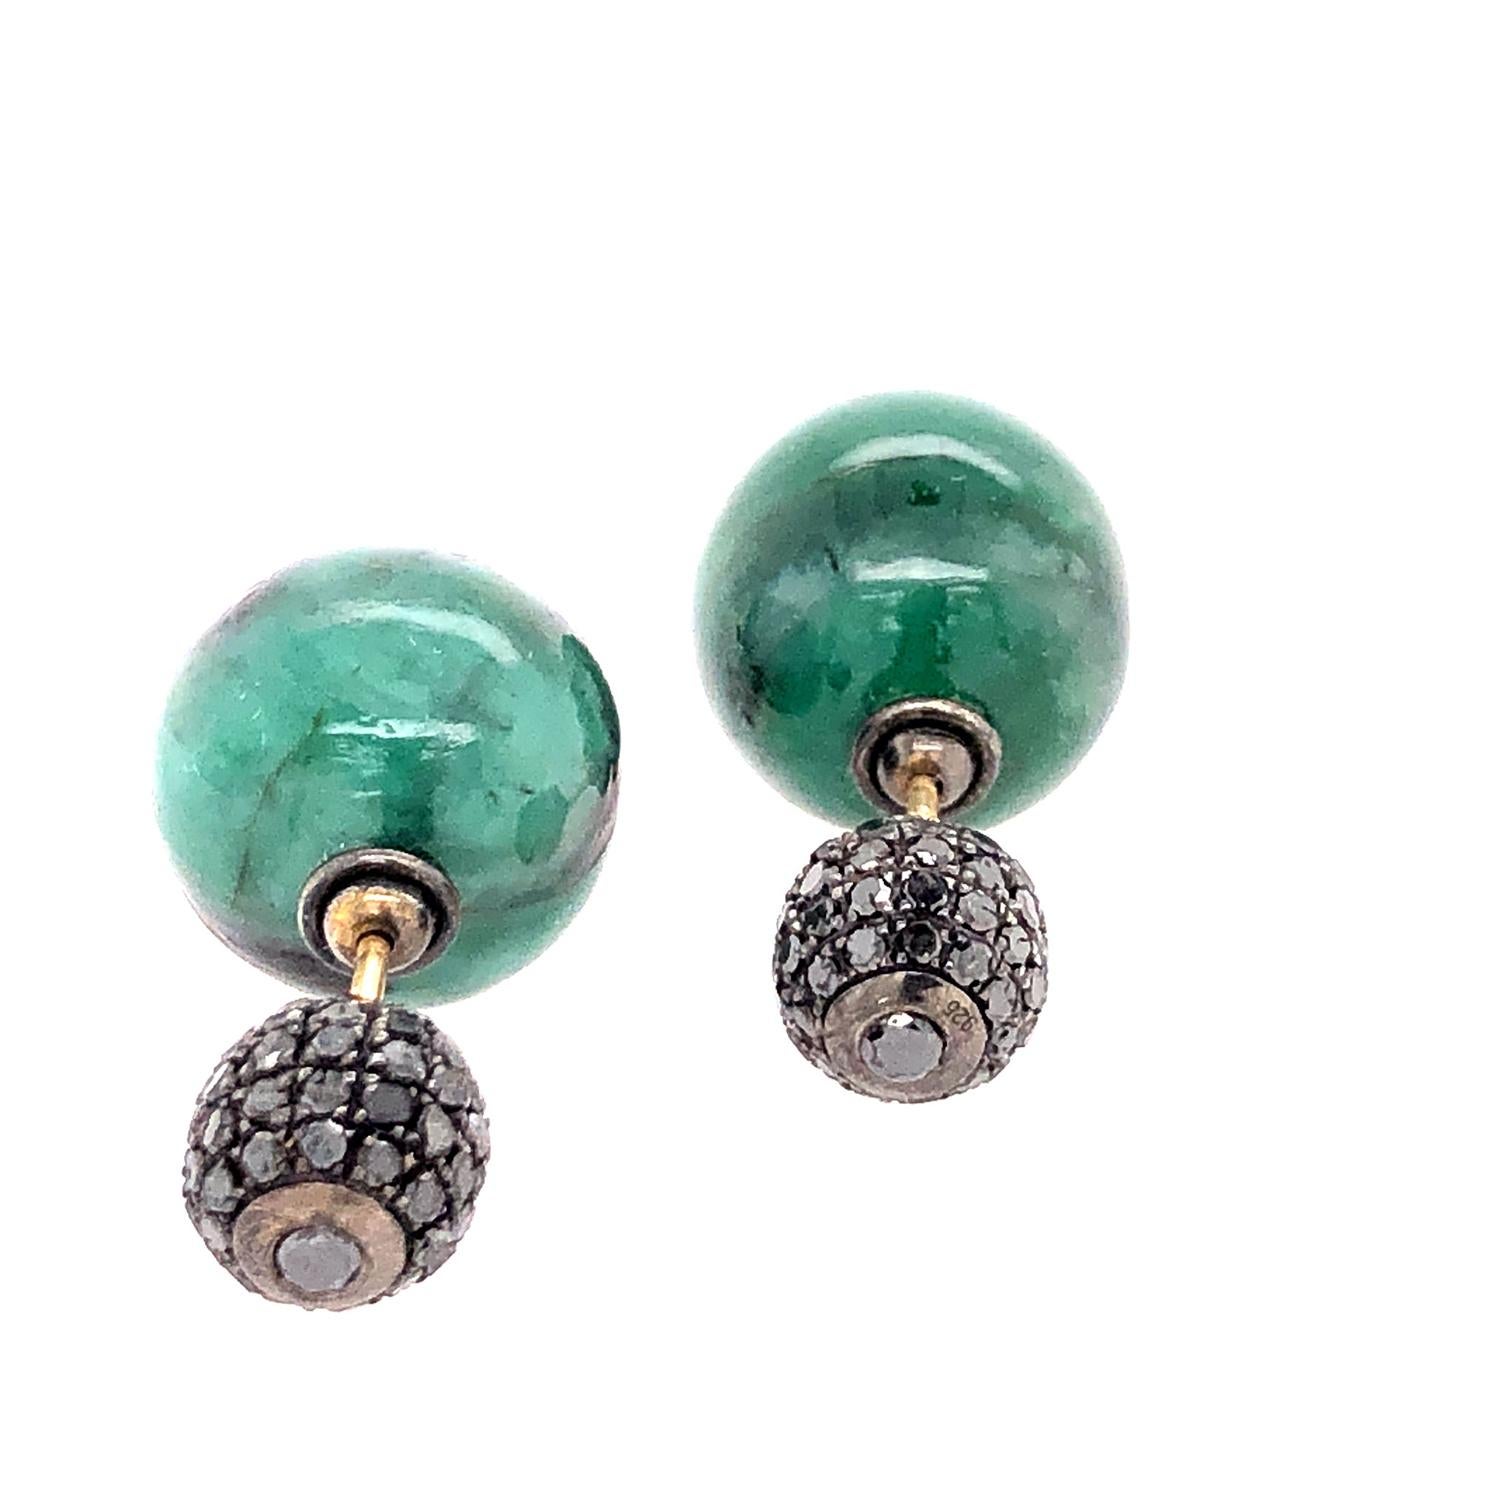 Emerald & Pave Diamond Ball Earring Made in 14k Gold & Silver (Kunsthandwerker*in) im Angebot